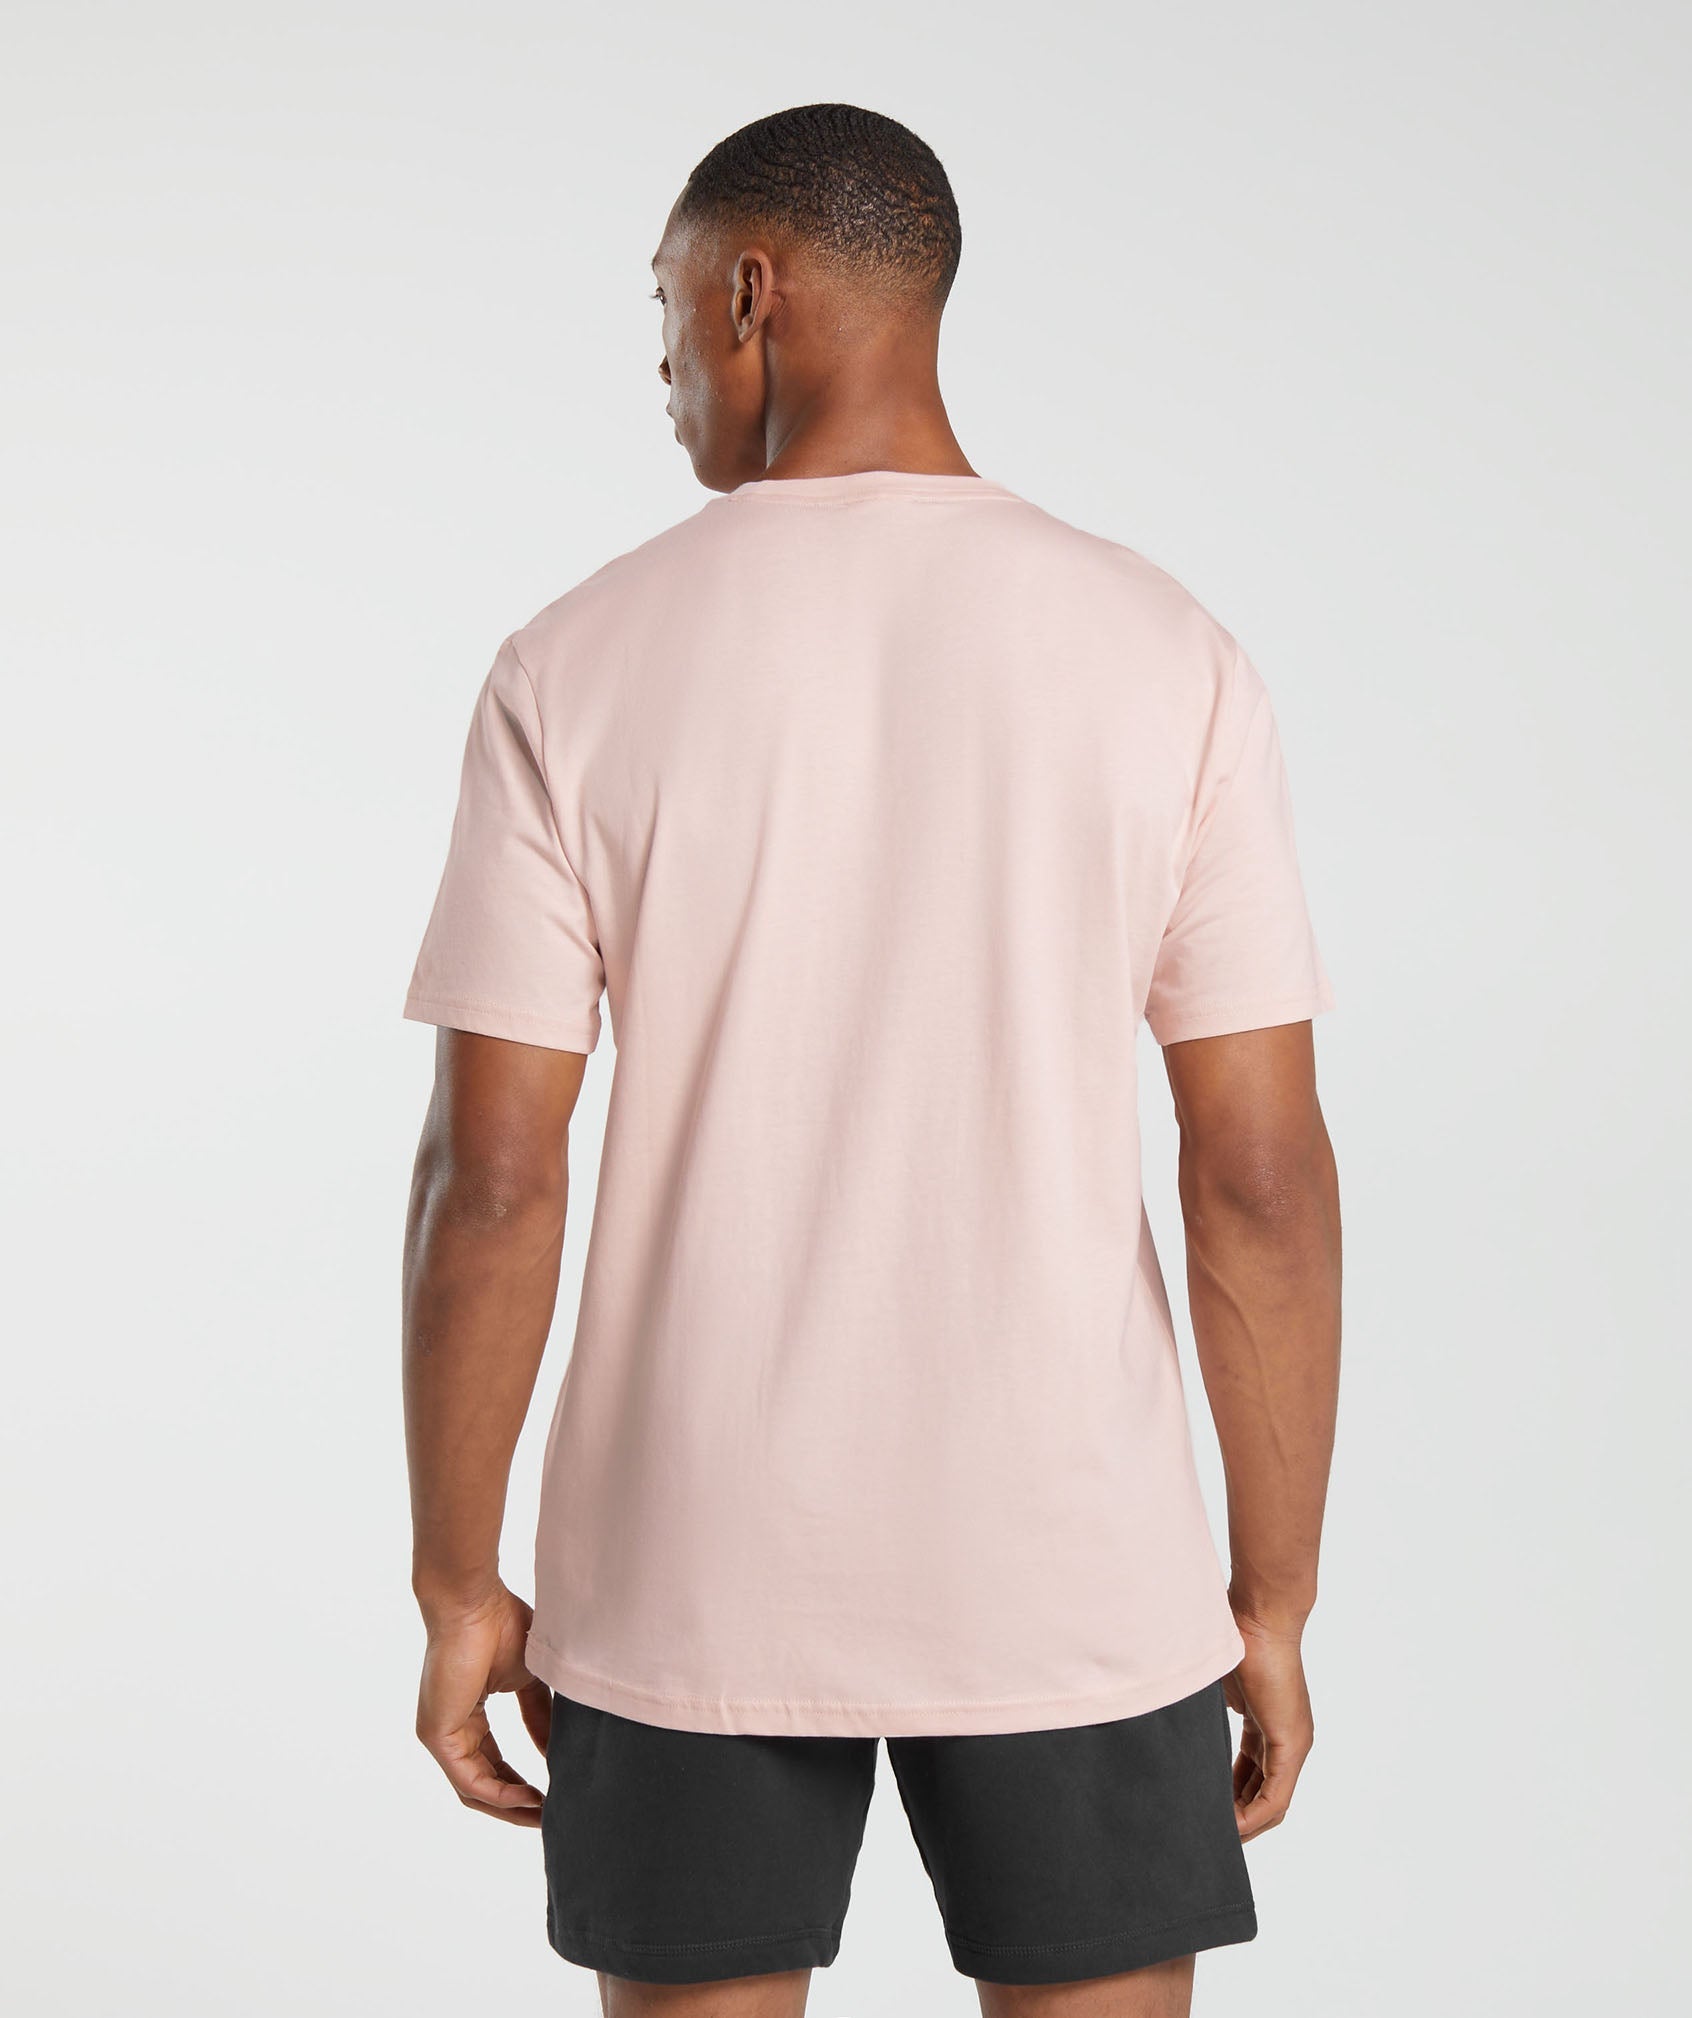 Crest T-Shirt in Misty Pink - view 2